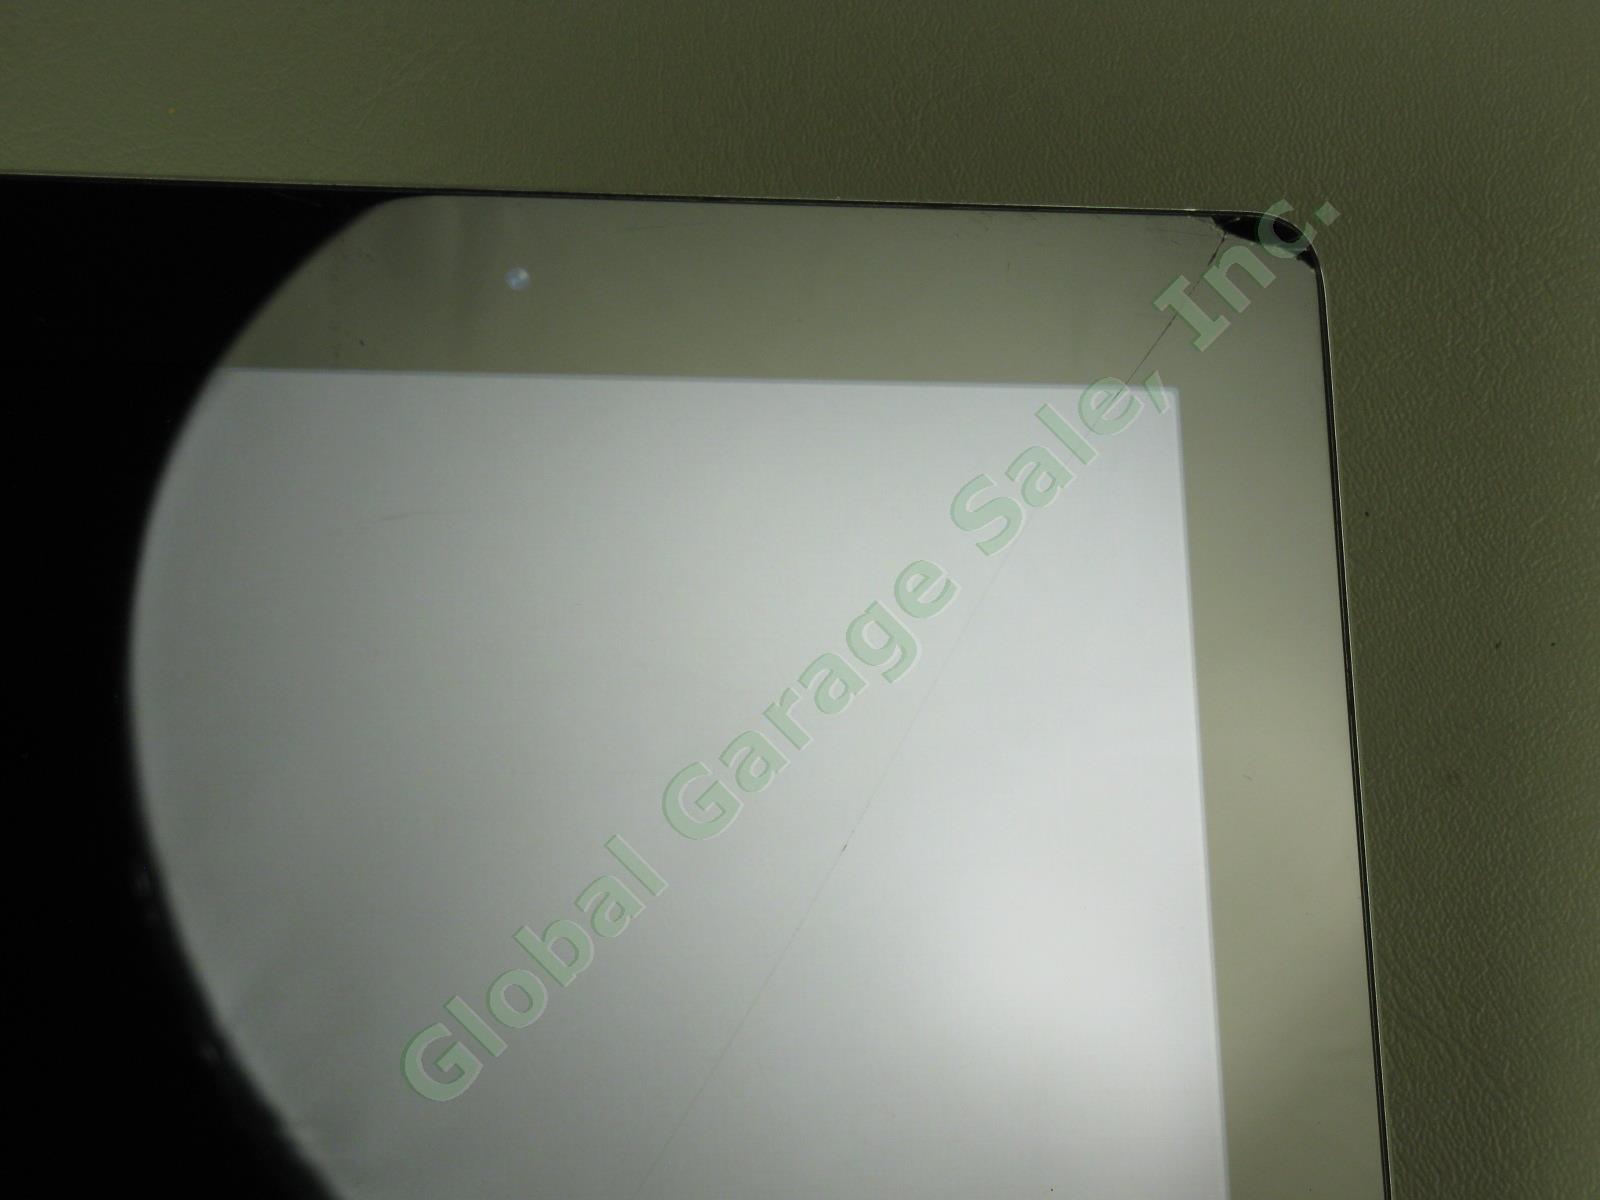 Apple iPad 2 Tablet 32GB Wifi 1 Owner Just Reset Cracked Screen MC770LL/A A1395 4